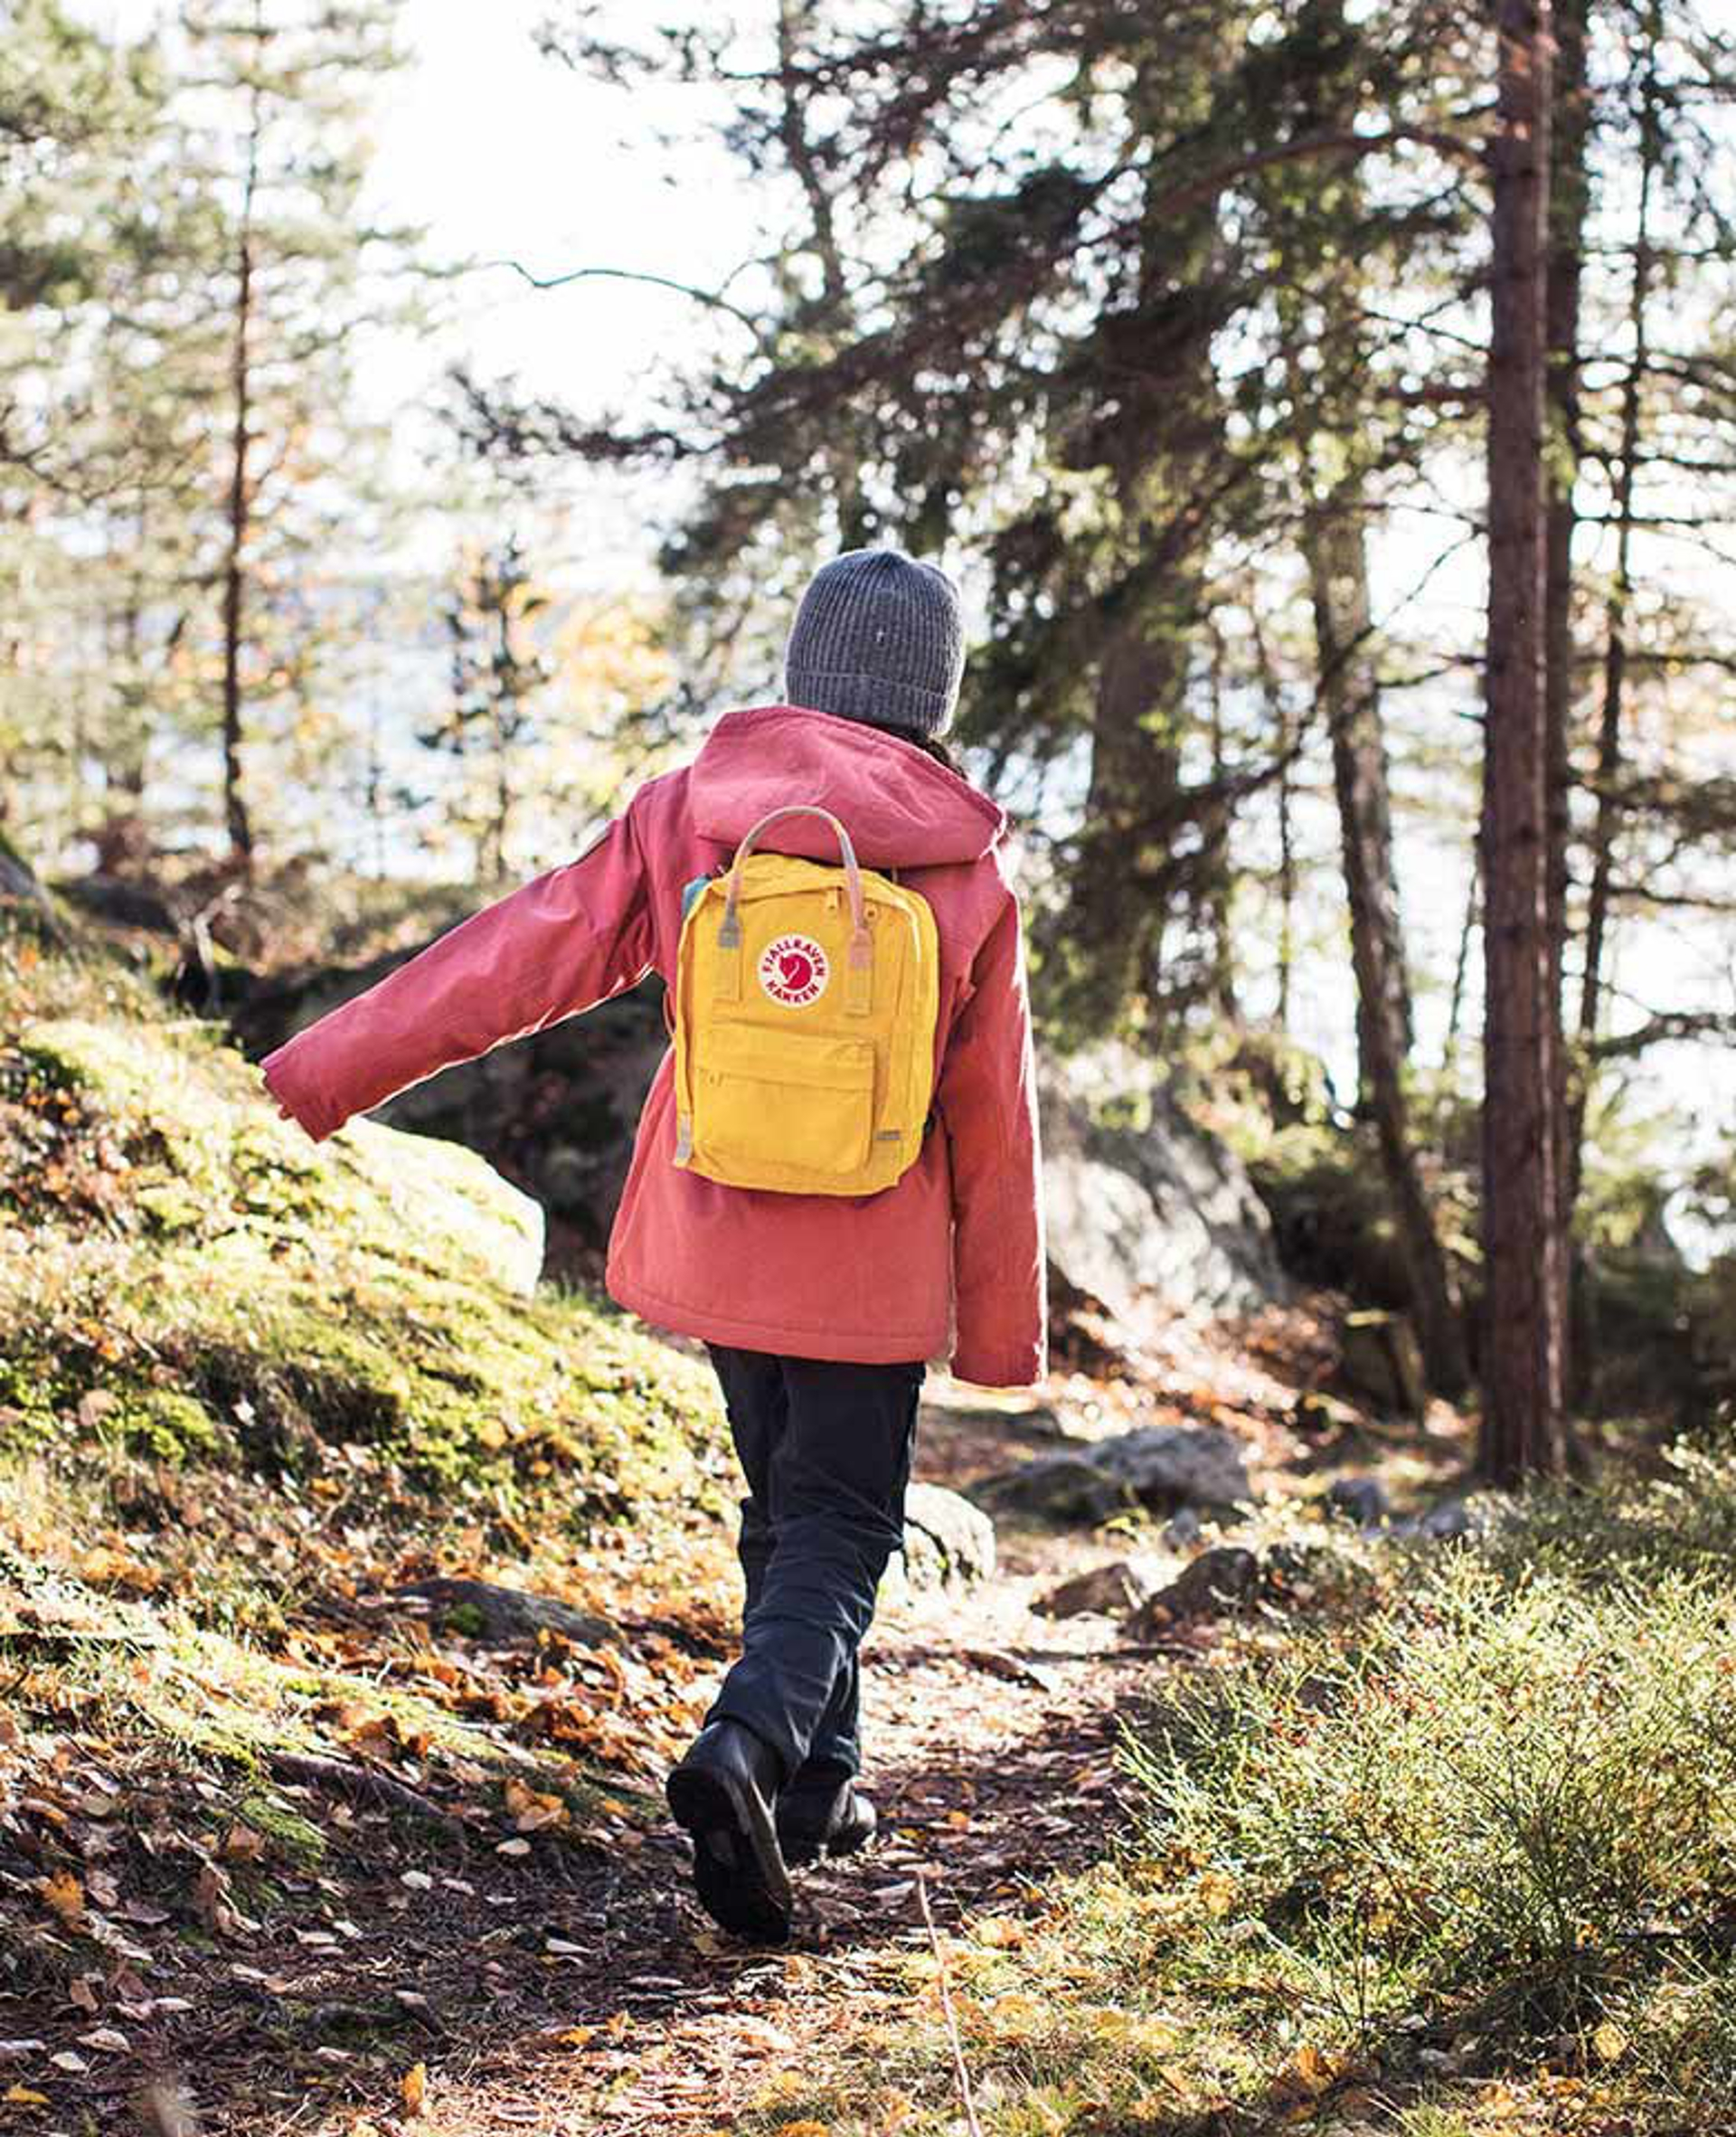 a young girl walking wearing fjallraven apparel and backpack